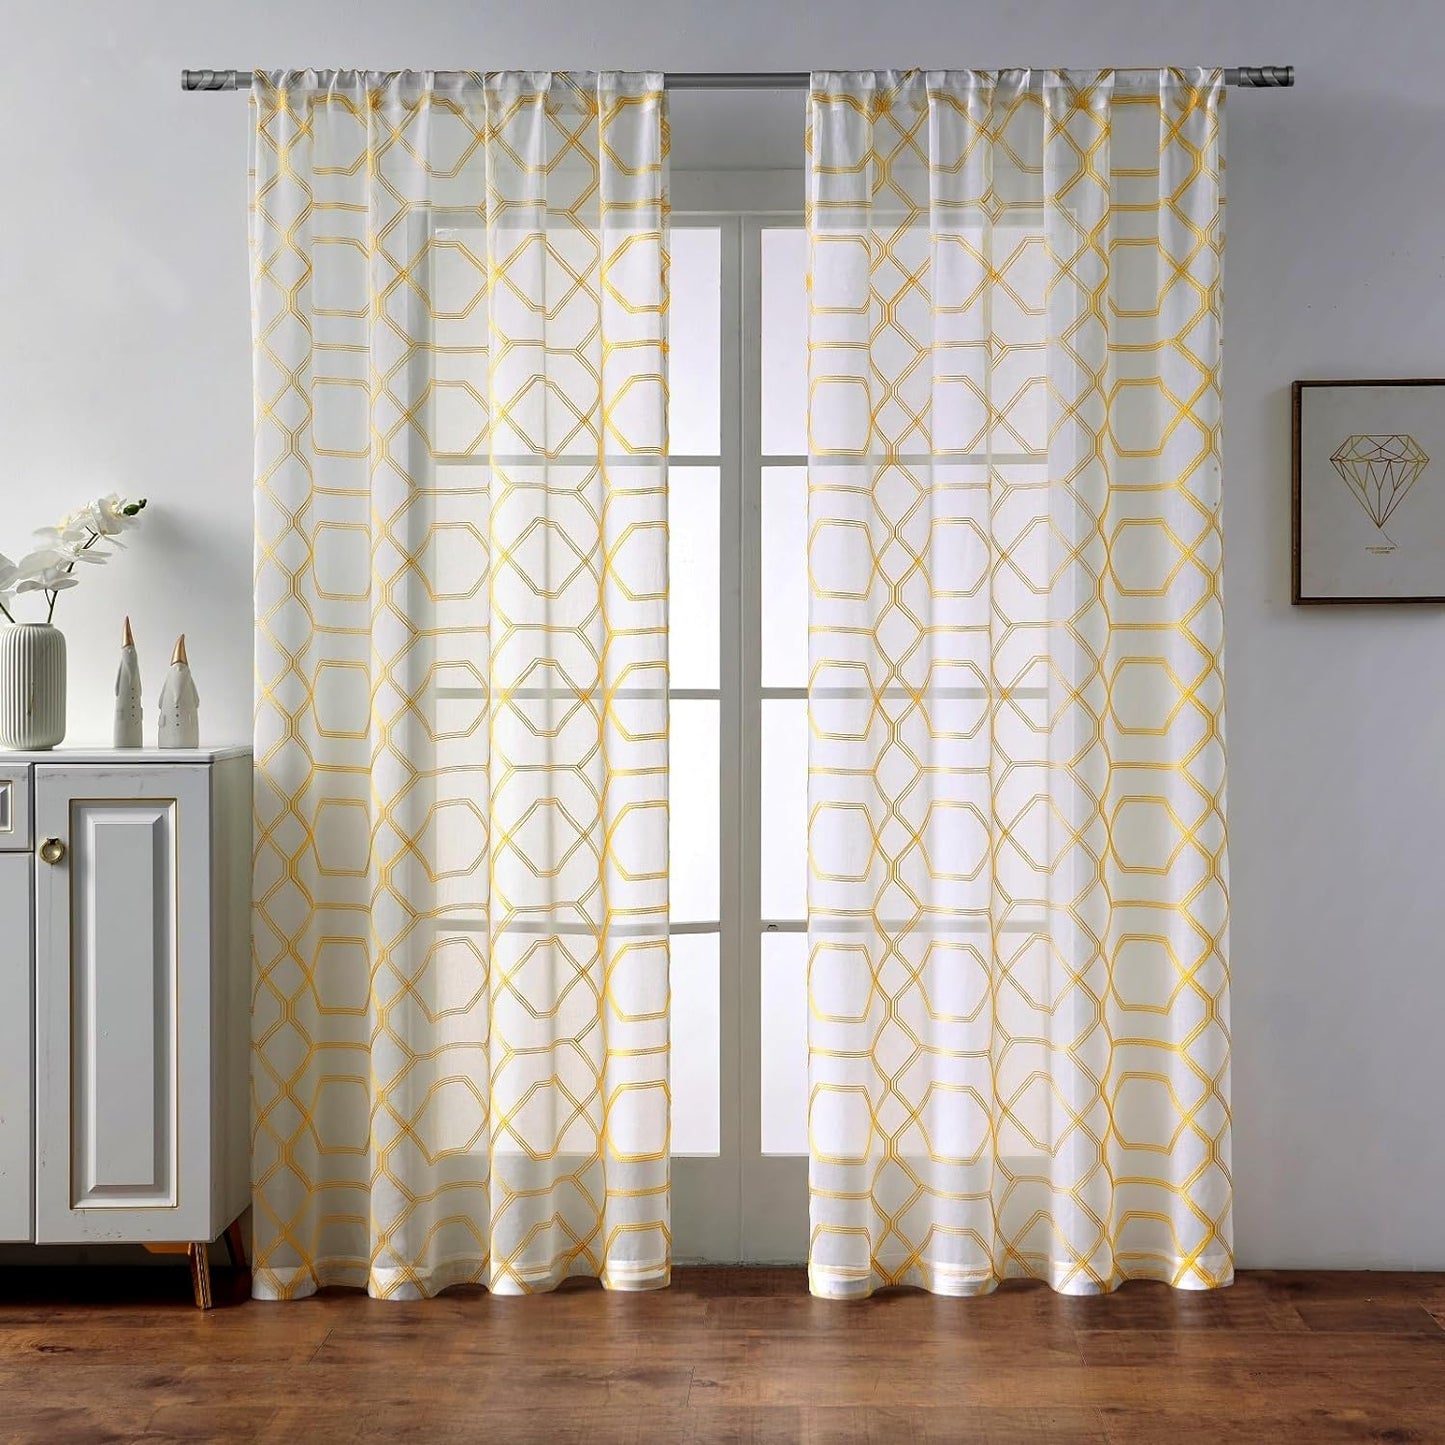 A-LINJD Gold Embroidered Geometric Sheer Curtains Design Half Pleated Rod Pocket White Sheer Curtains Panel for Patio, Living Room, Set of 2, 54Inch X 63 Inch  A-LINJD Yellow 54*84 